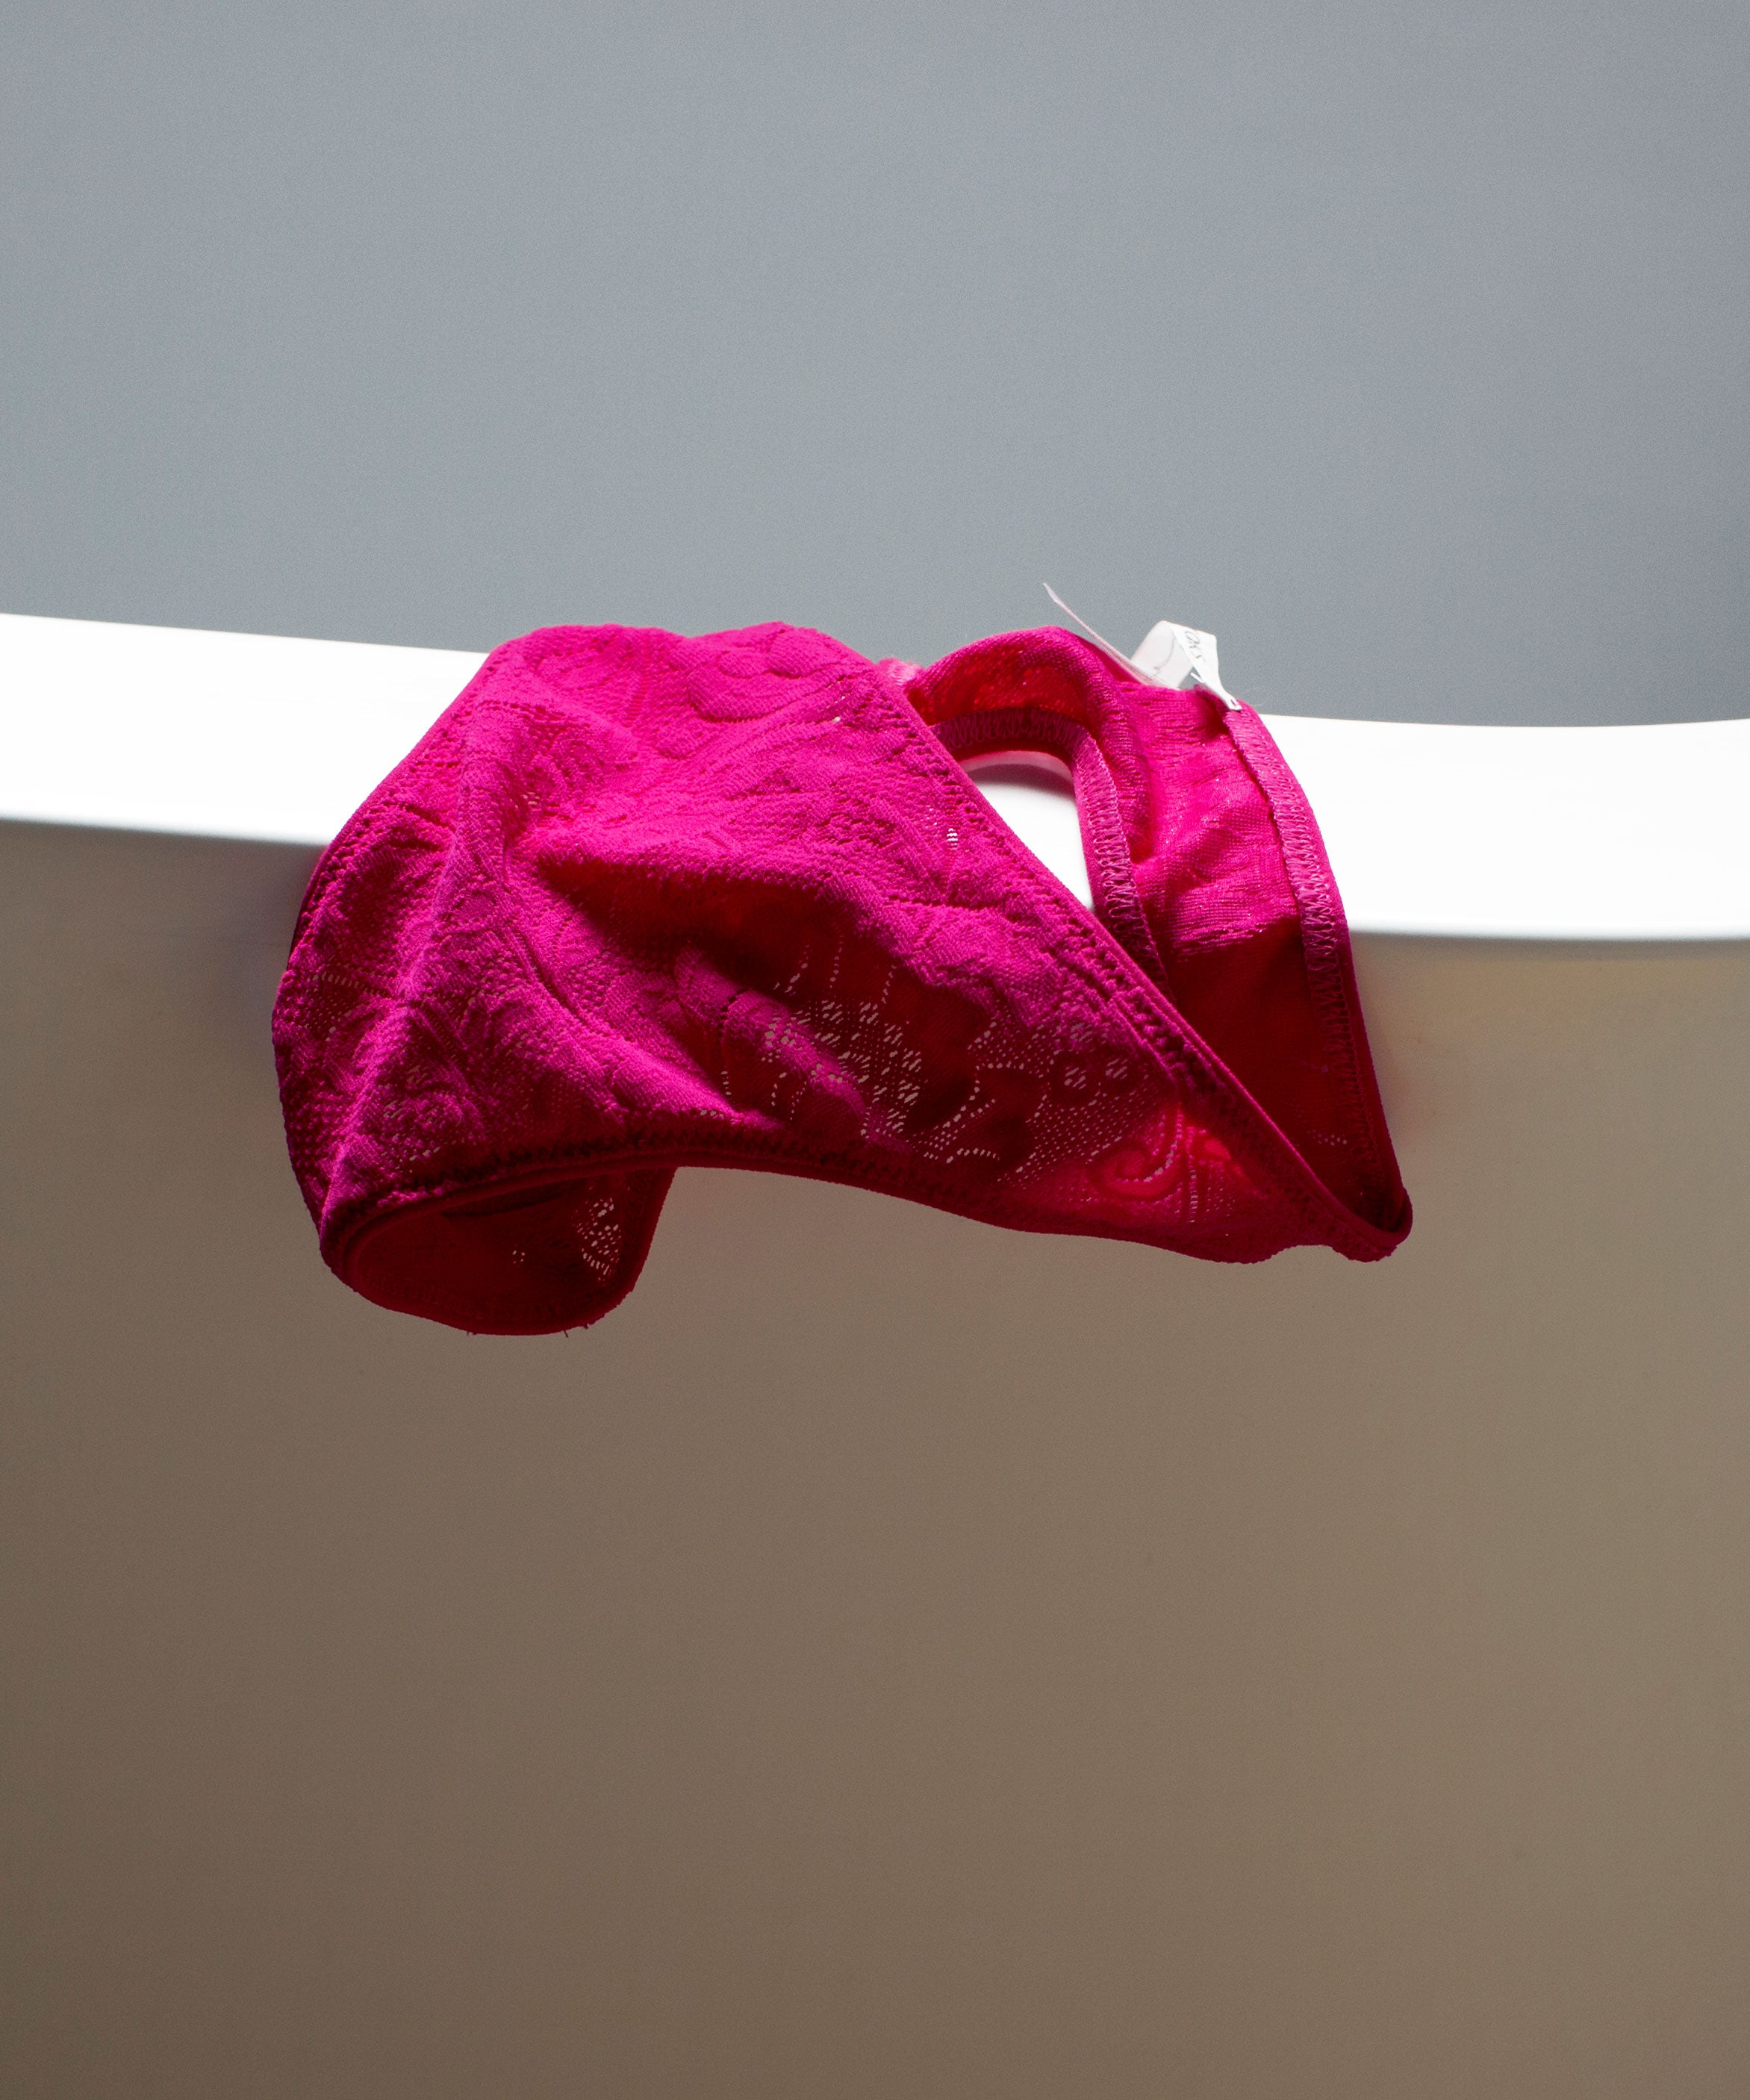 How Often Should You Change Your Underwear?